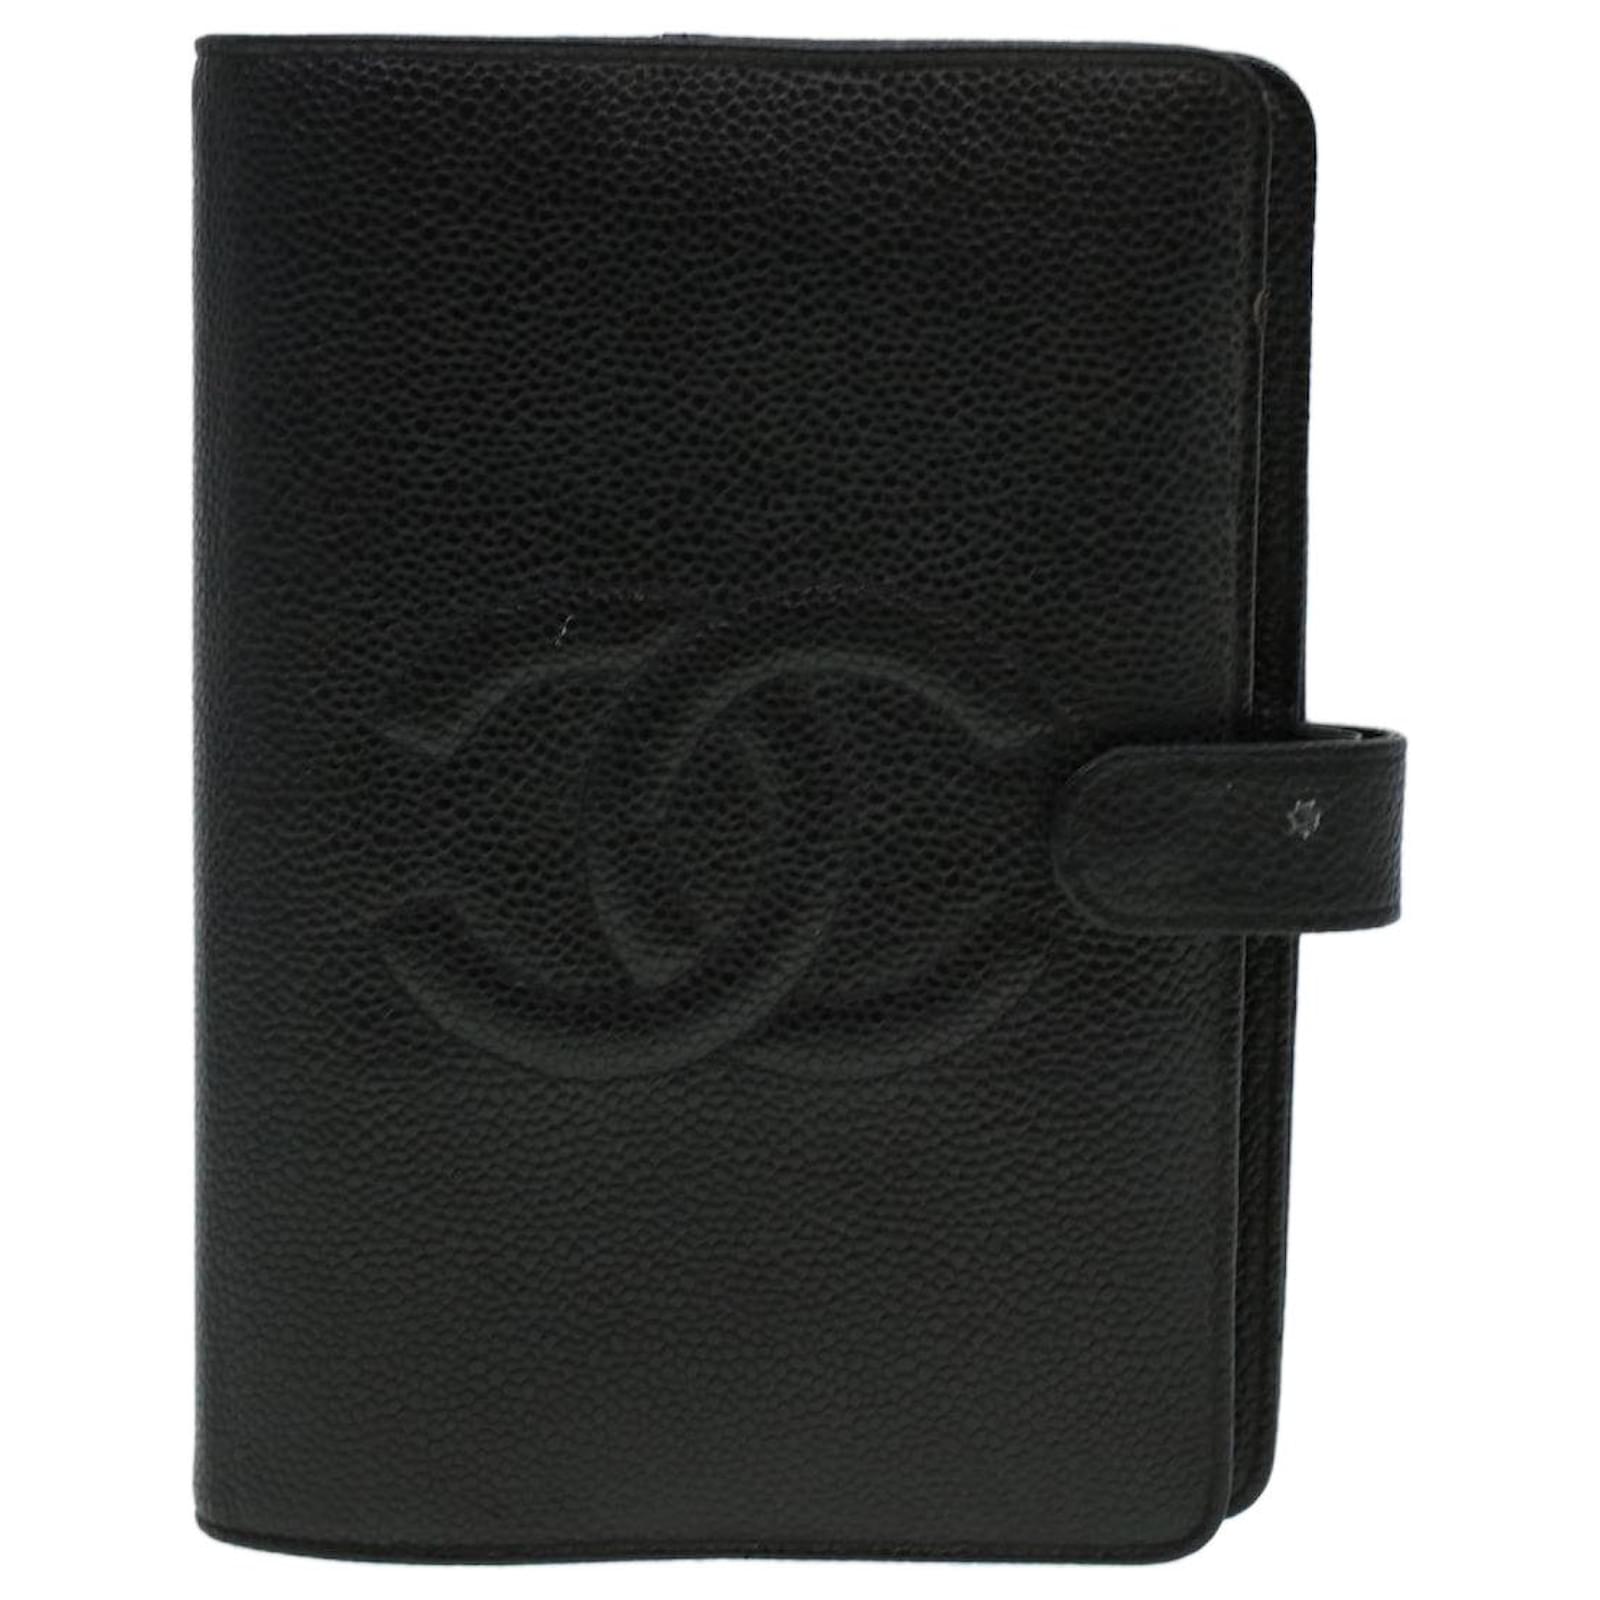 Chanel Timeless CC Ring Black Caviar Agenda Passport Cover Gold with Box